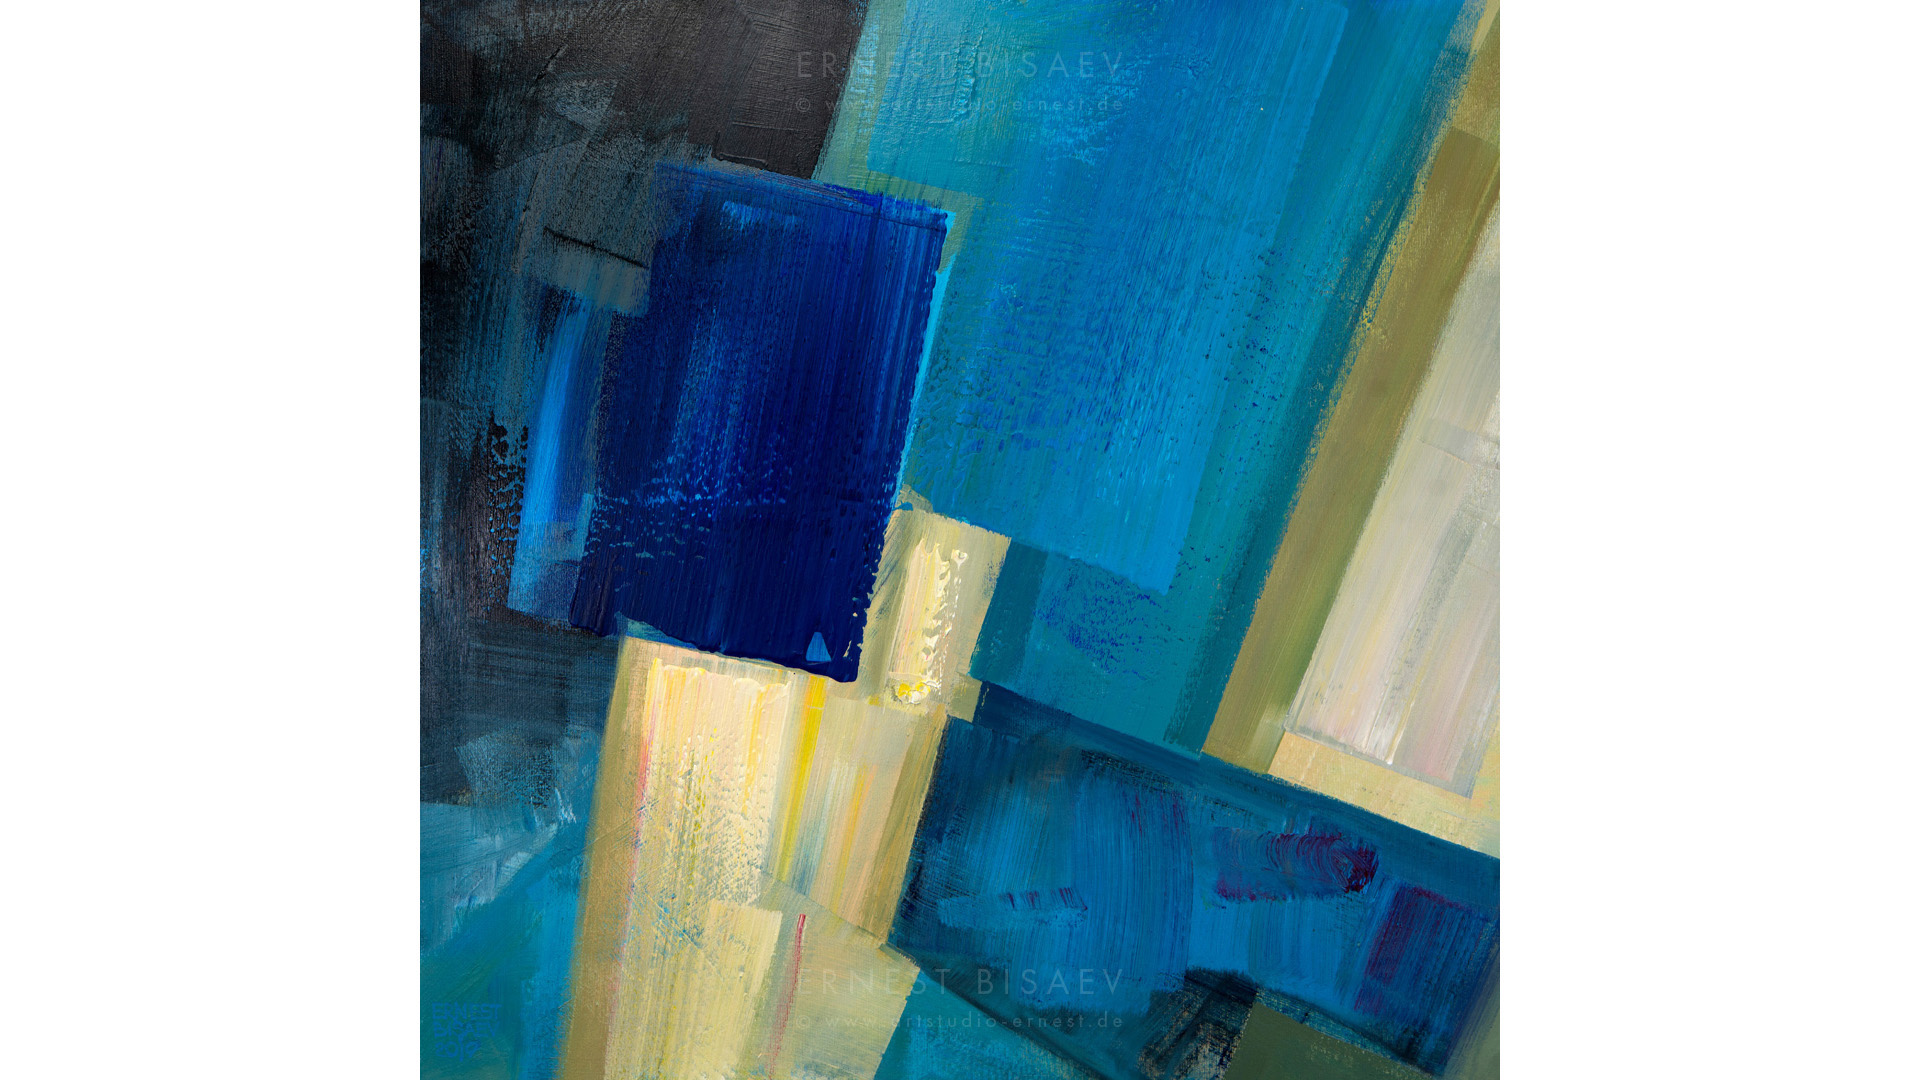 Gray and Blue 91019, Acrylic on Canvas, 80x80cm, 2019 © Ernest Bisaev